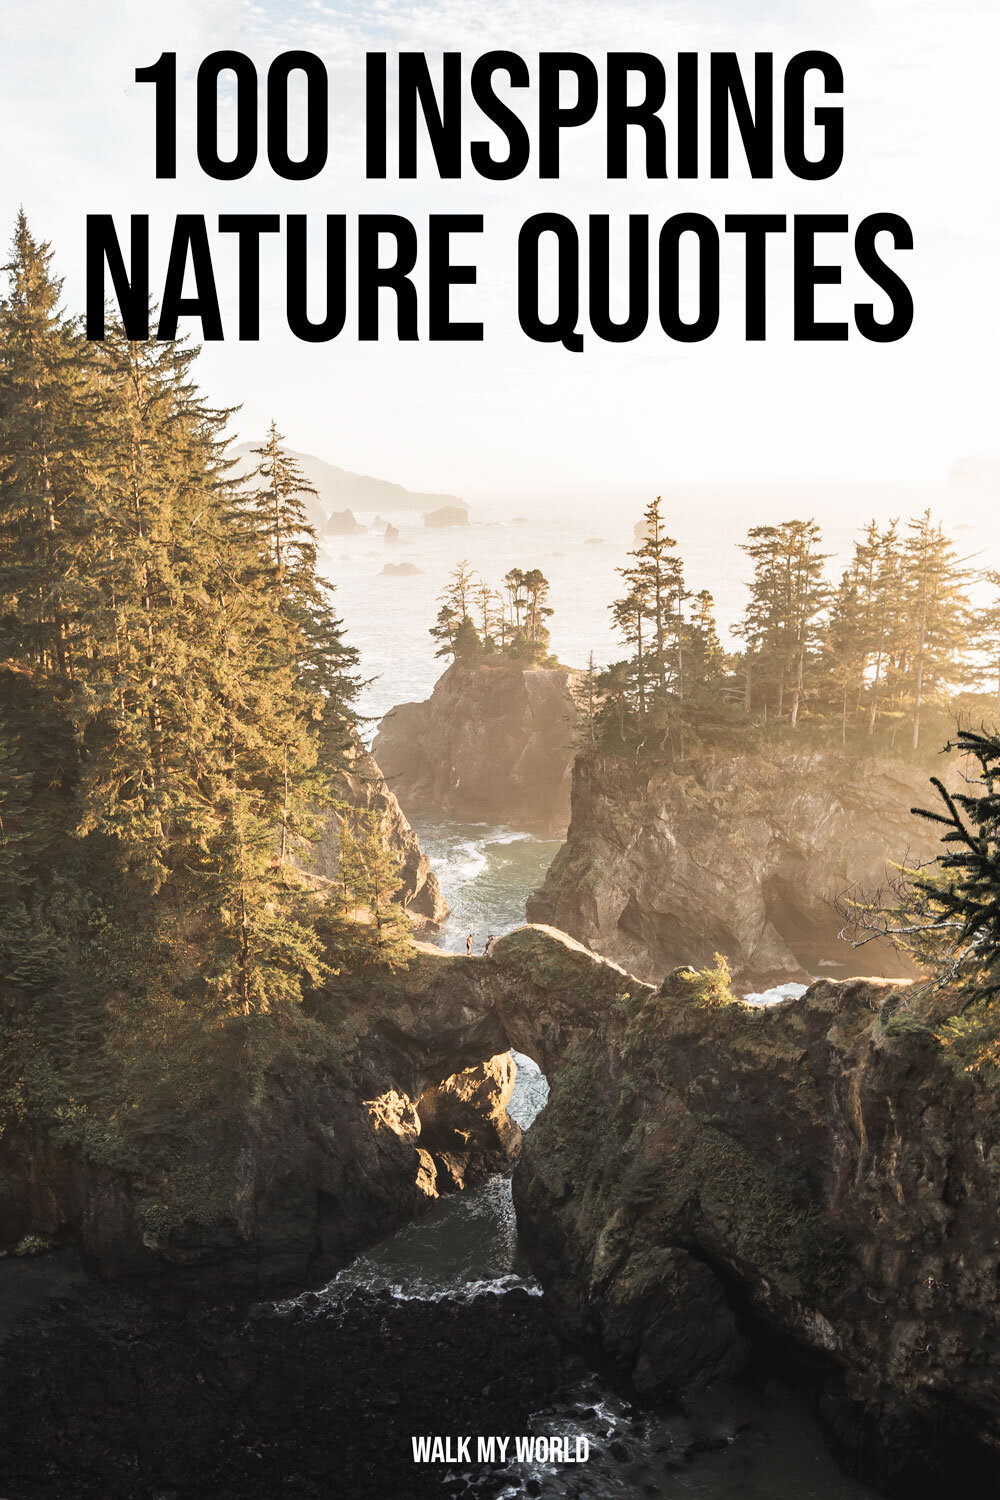 photo essay about nature with captions